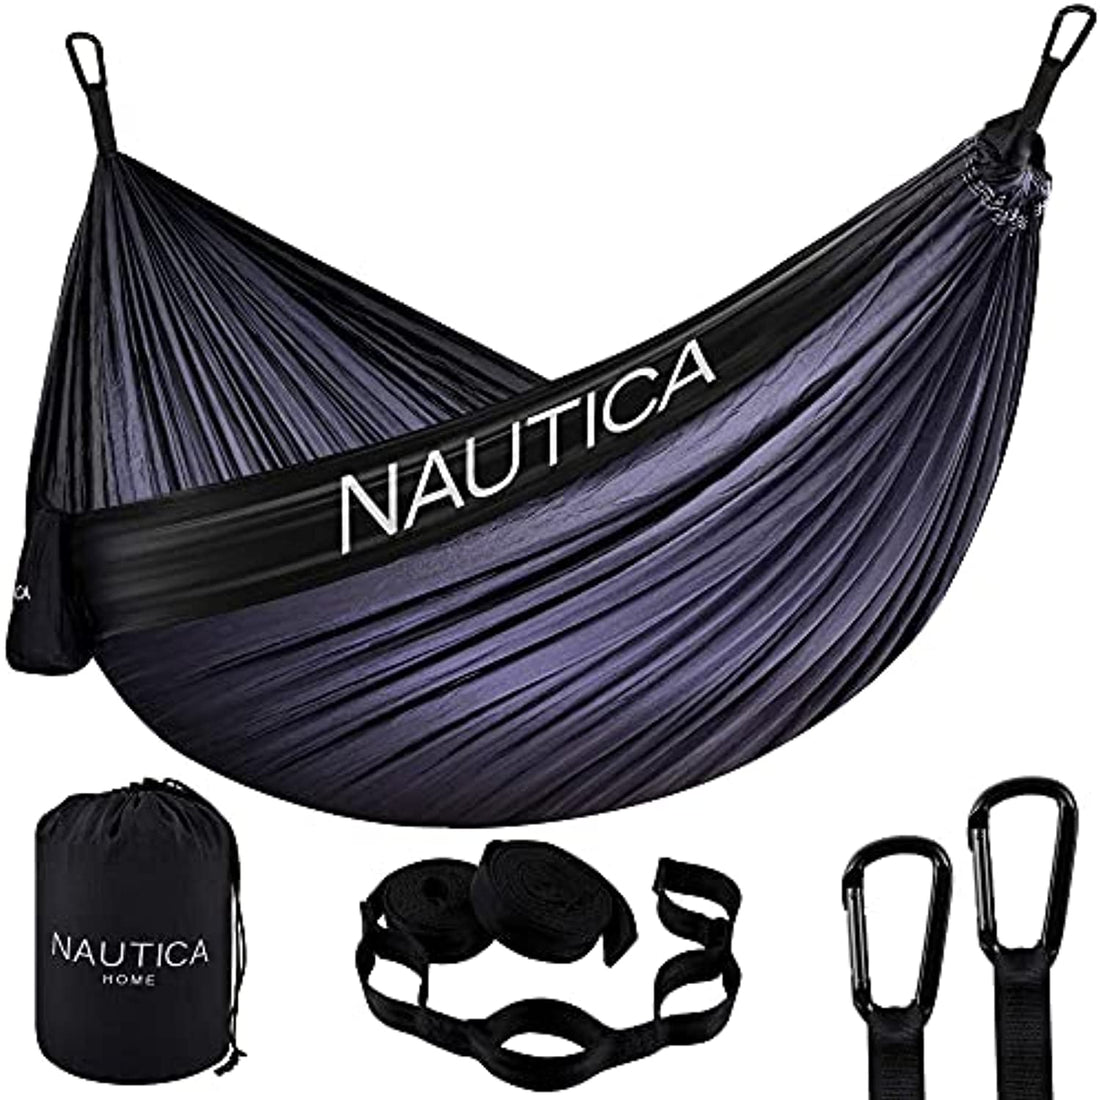 Nautica Portable Camping Hammock 1-2Person Kids or Adults with Straps, Caribiners & Bag for Travel/Backpacking/Hiking/Backyard/Lawn, Black Beauty/Dark Grey, Small